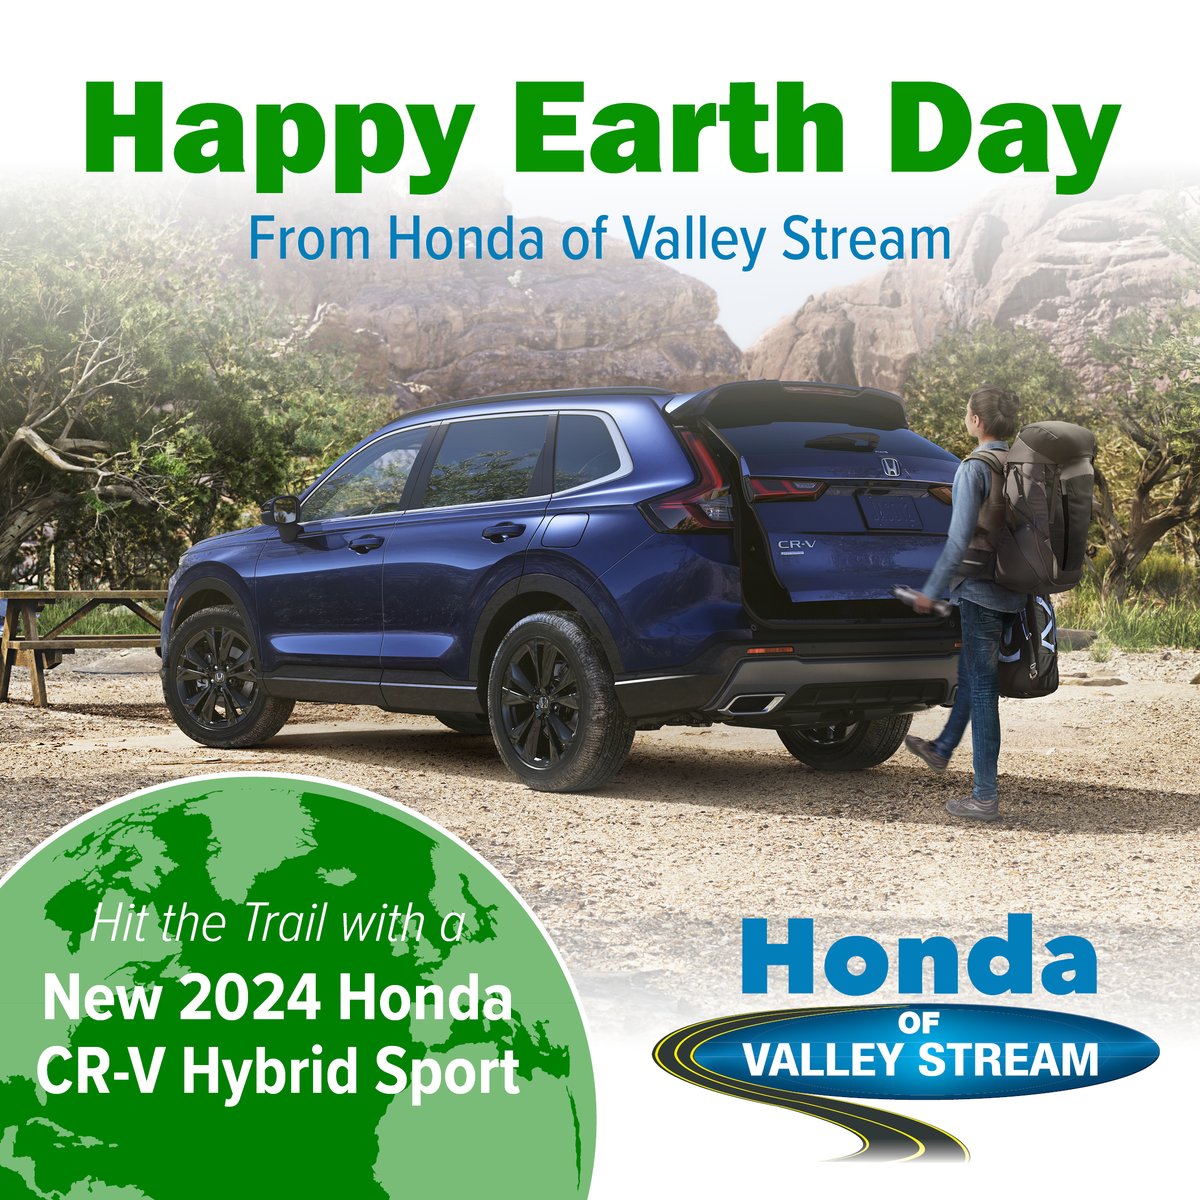 Join us in celebrating Earth Day at Honda of Valley Stream! 🌎 Introducing the eco-friendly 2024 Honda CR-V Hybrid Sport – where sustainability meets style. Take a step towards a greener future with us! ow.ly/mbJz50R1ejT